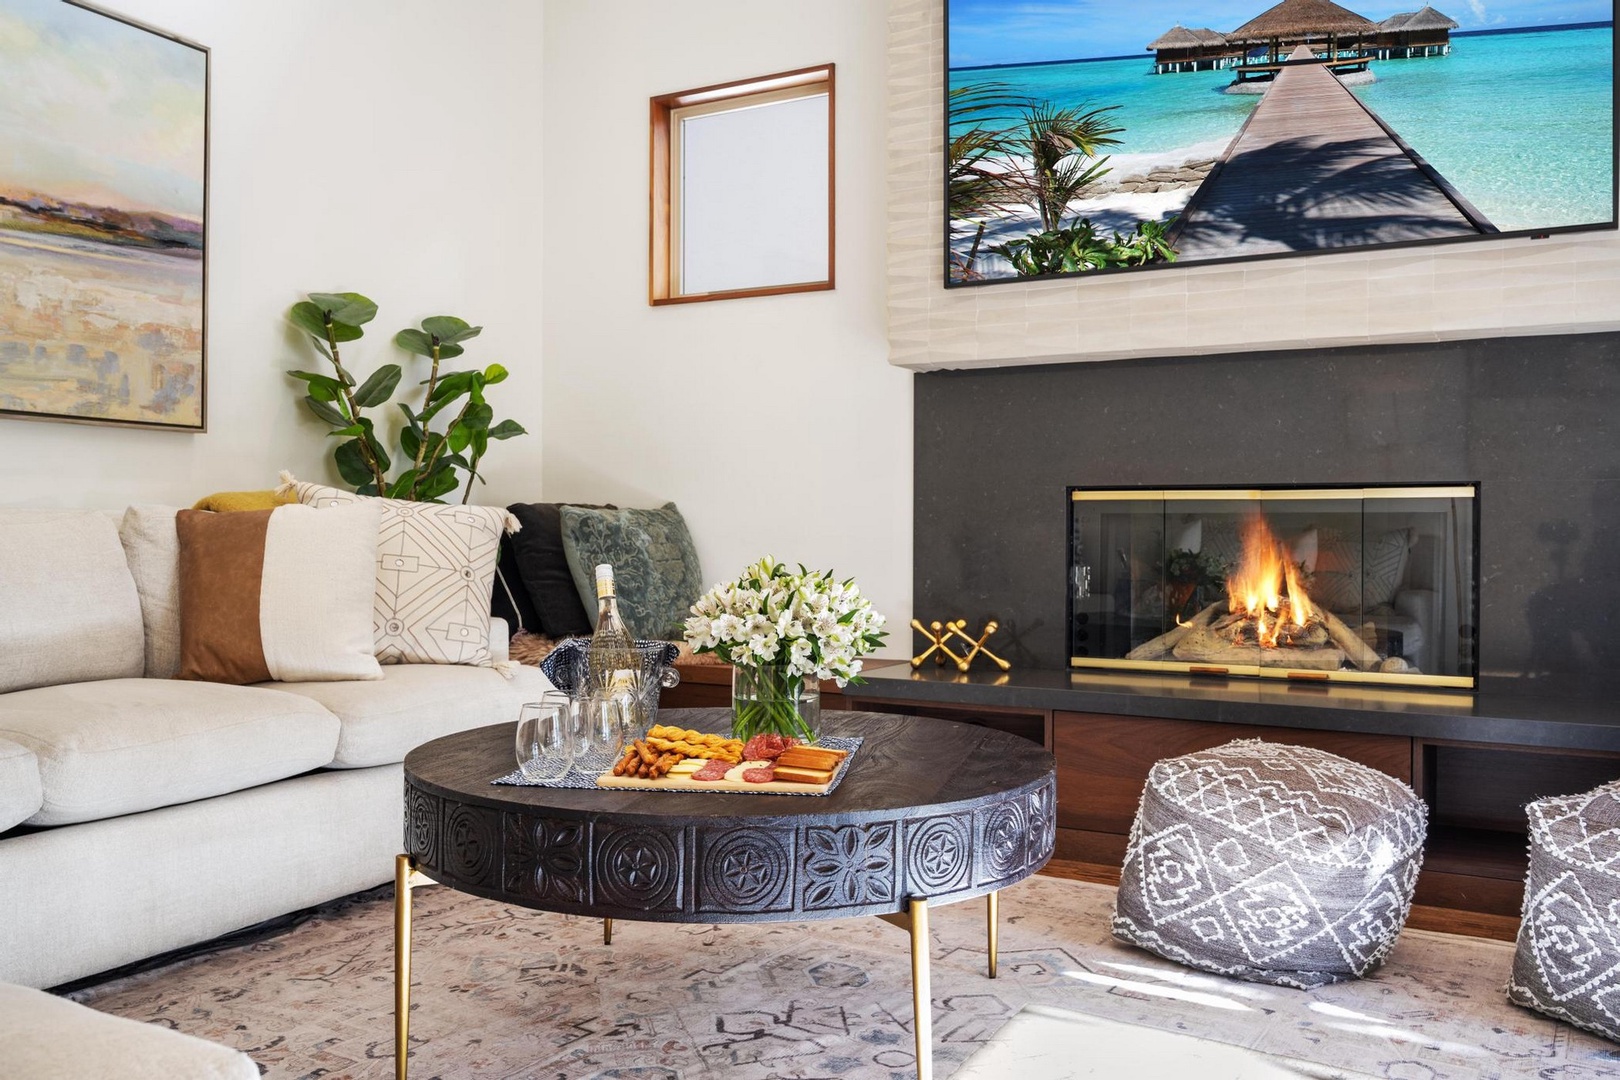 Living area with gas fireplace and TV